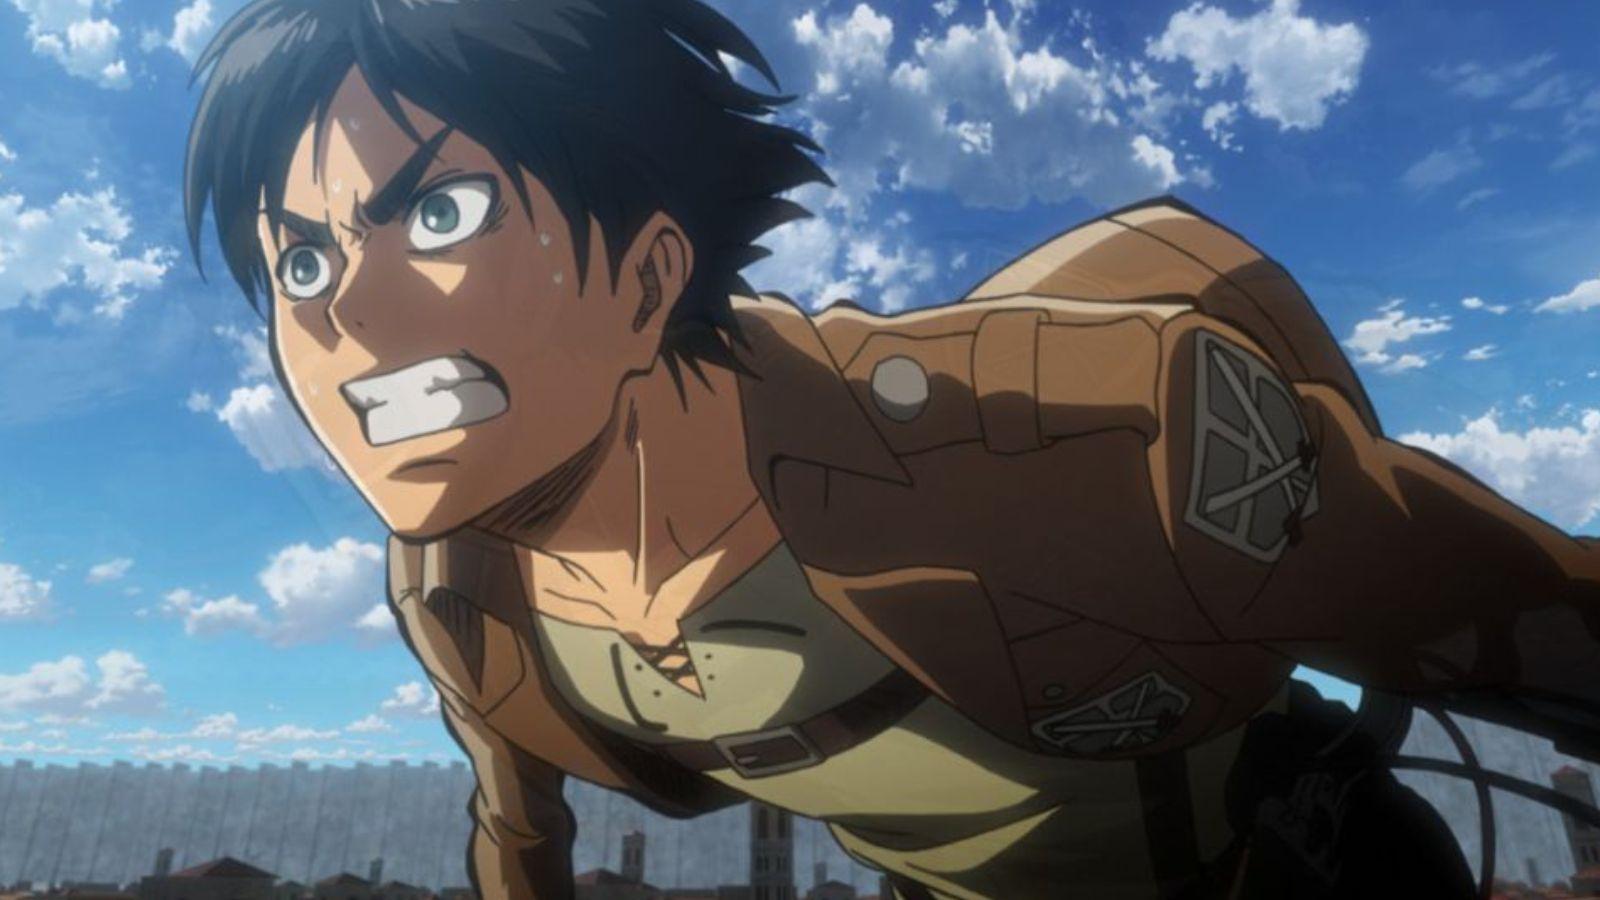 Attack on Titan The Final Chapters: Special 1 (TV Episode 2023